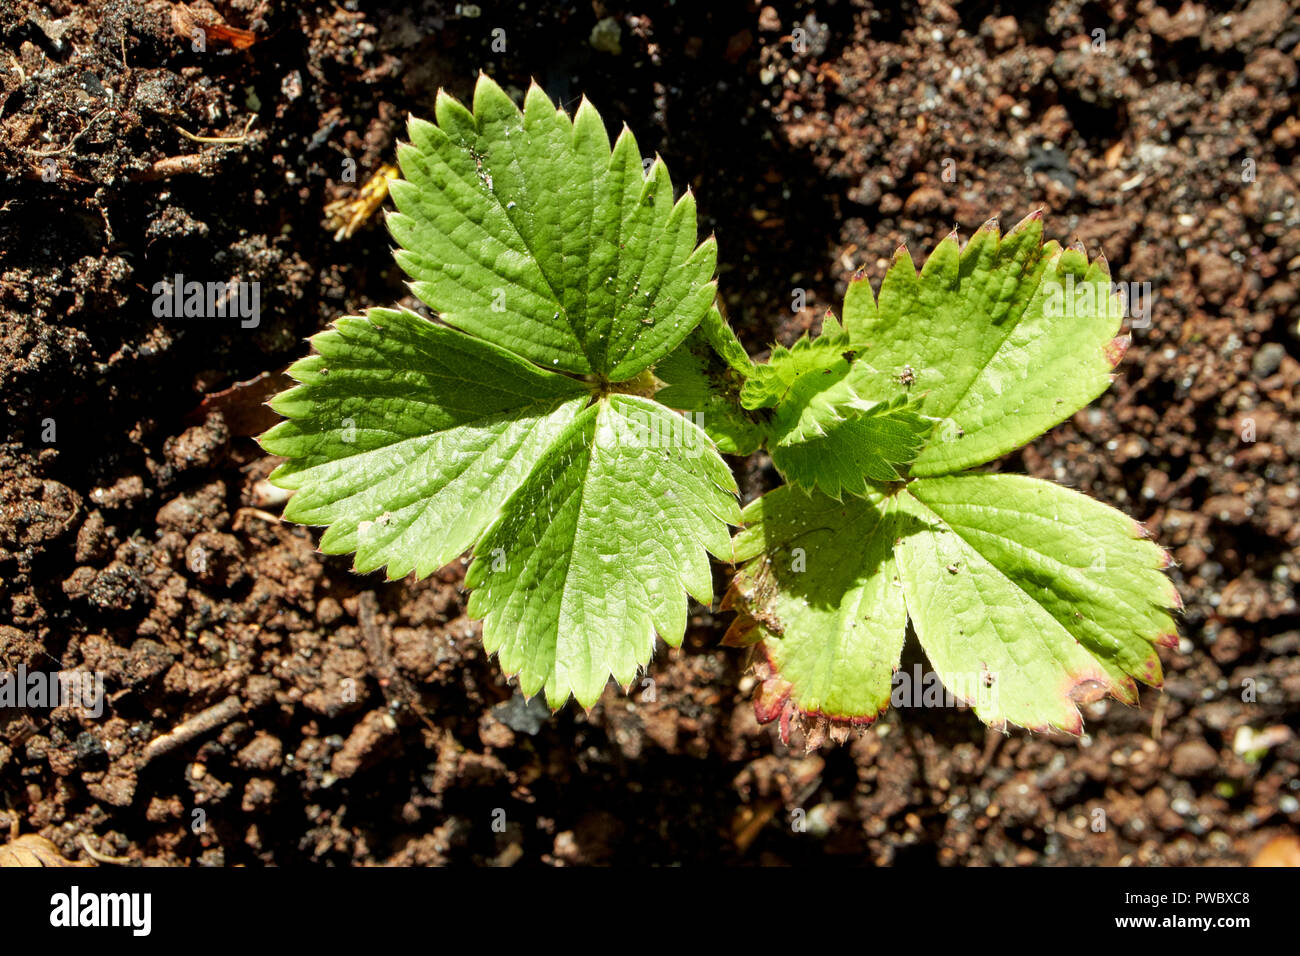 small strawberry plant growing plants in garden Stock Photo